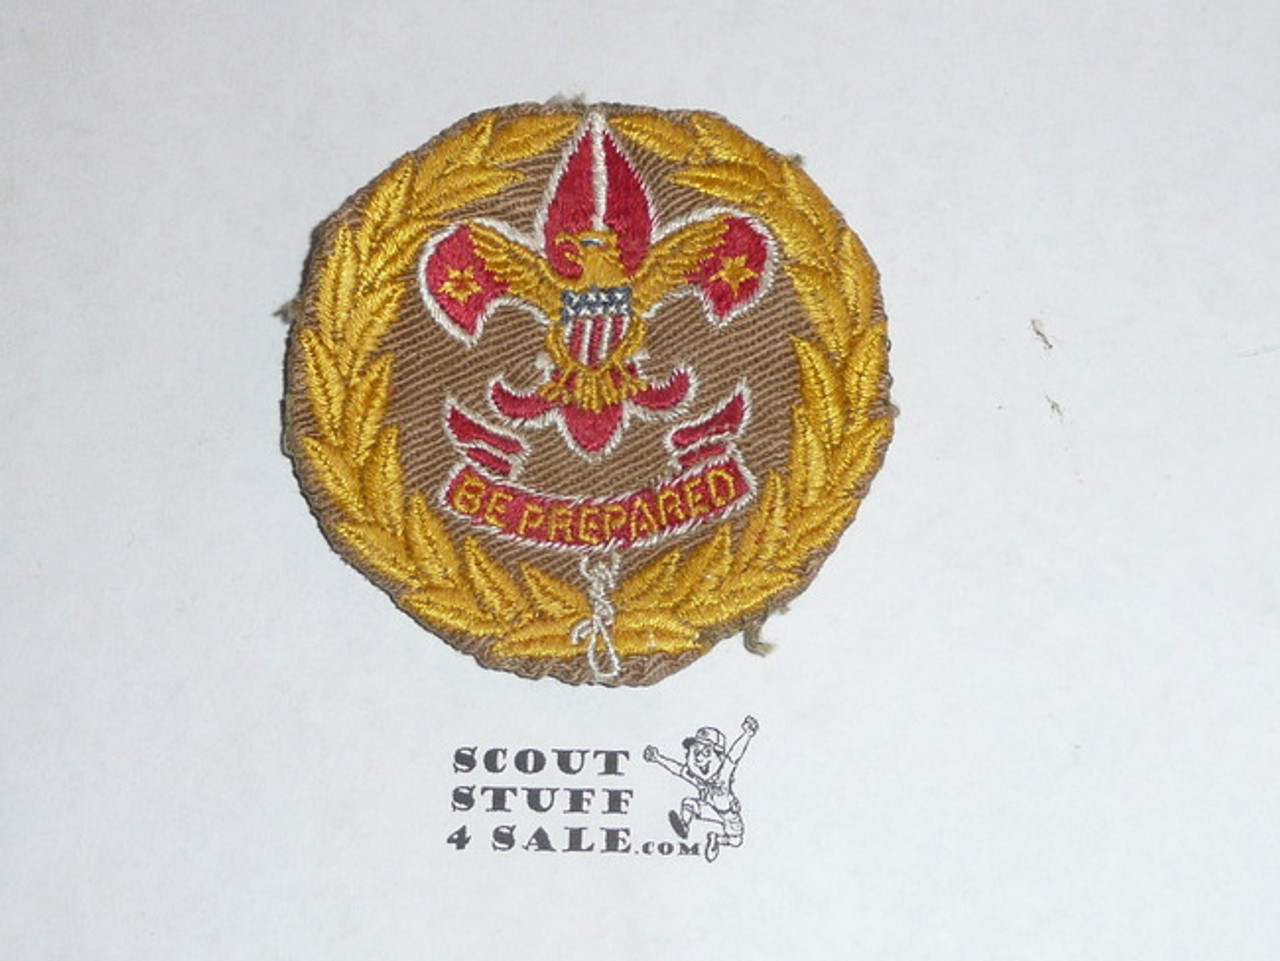 District Executive / Field Executive Patch (FE2), 1939-1945, used